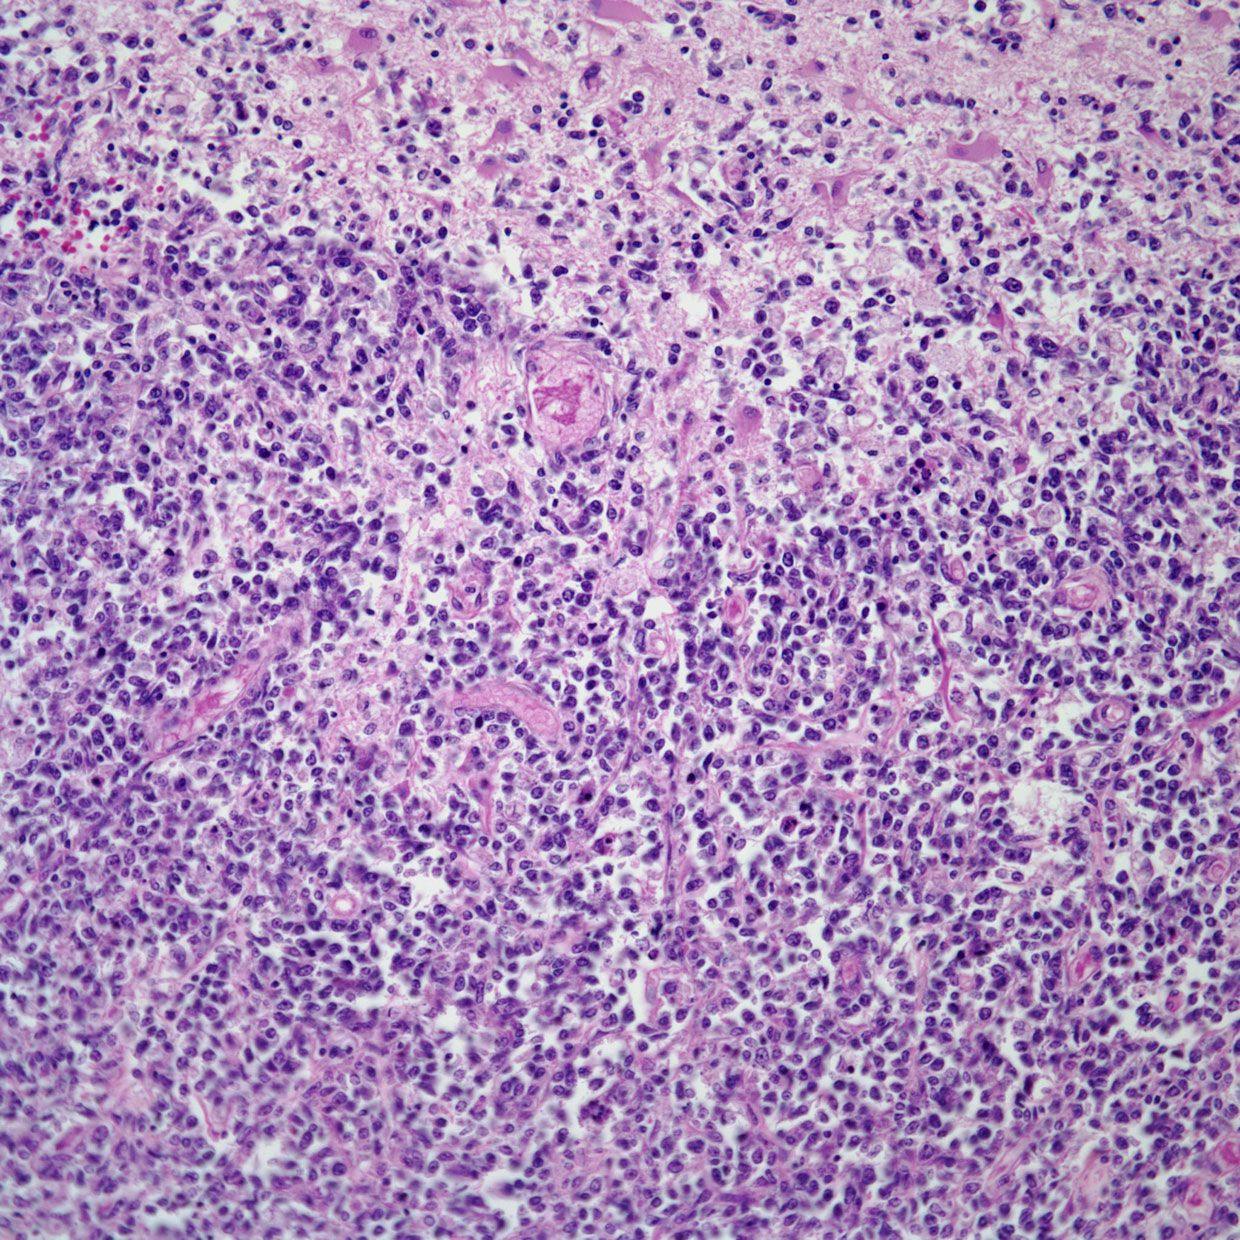 Brain Lesion in 54-Year-Old Patient